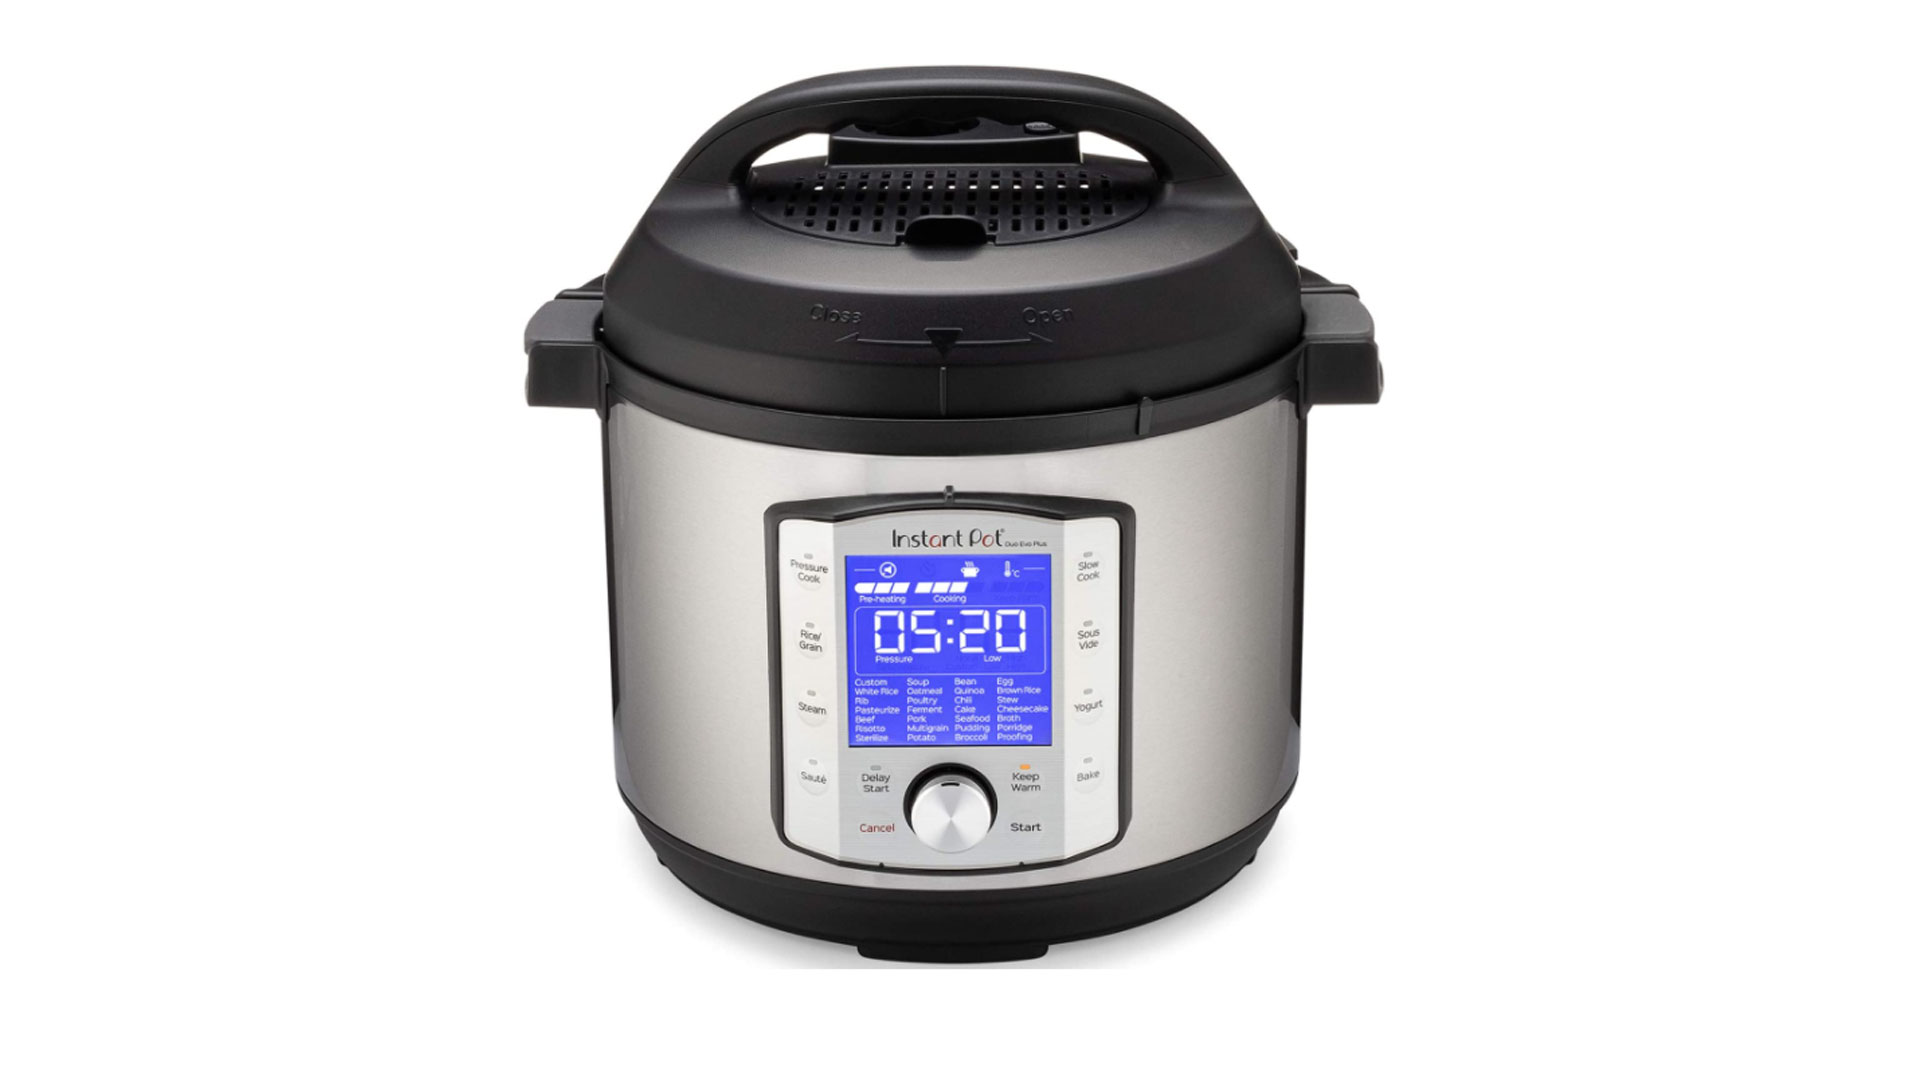 Duo Evo Plus Review After 6 Months (and 2 Pots) // Instant Pot 